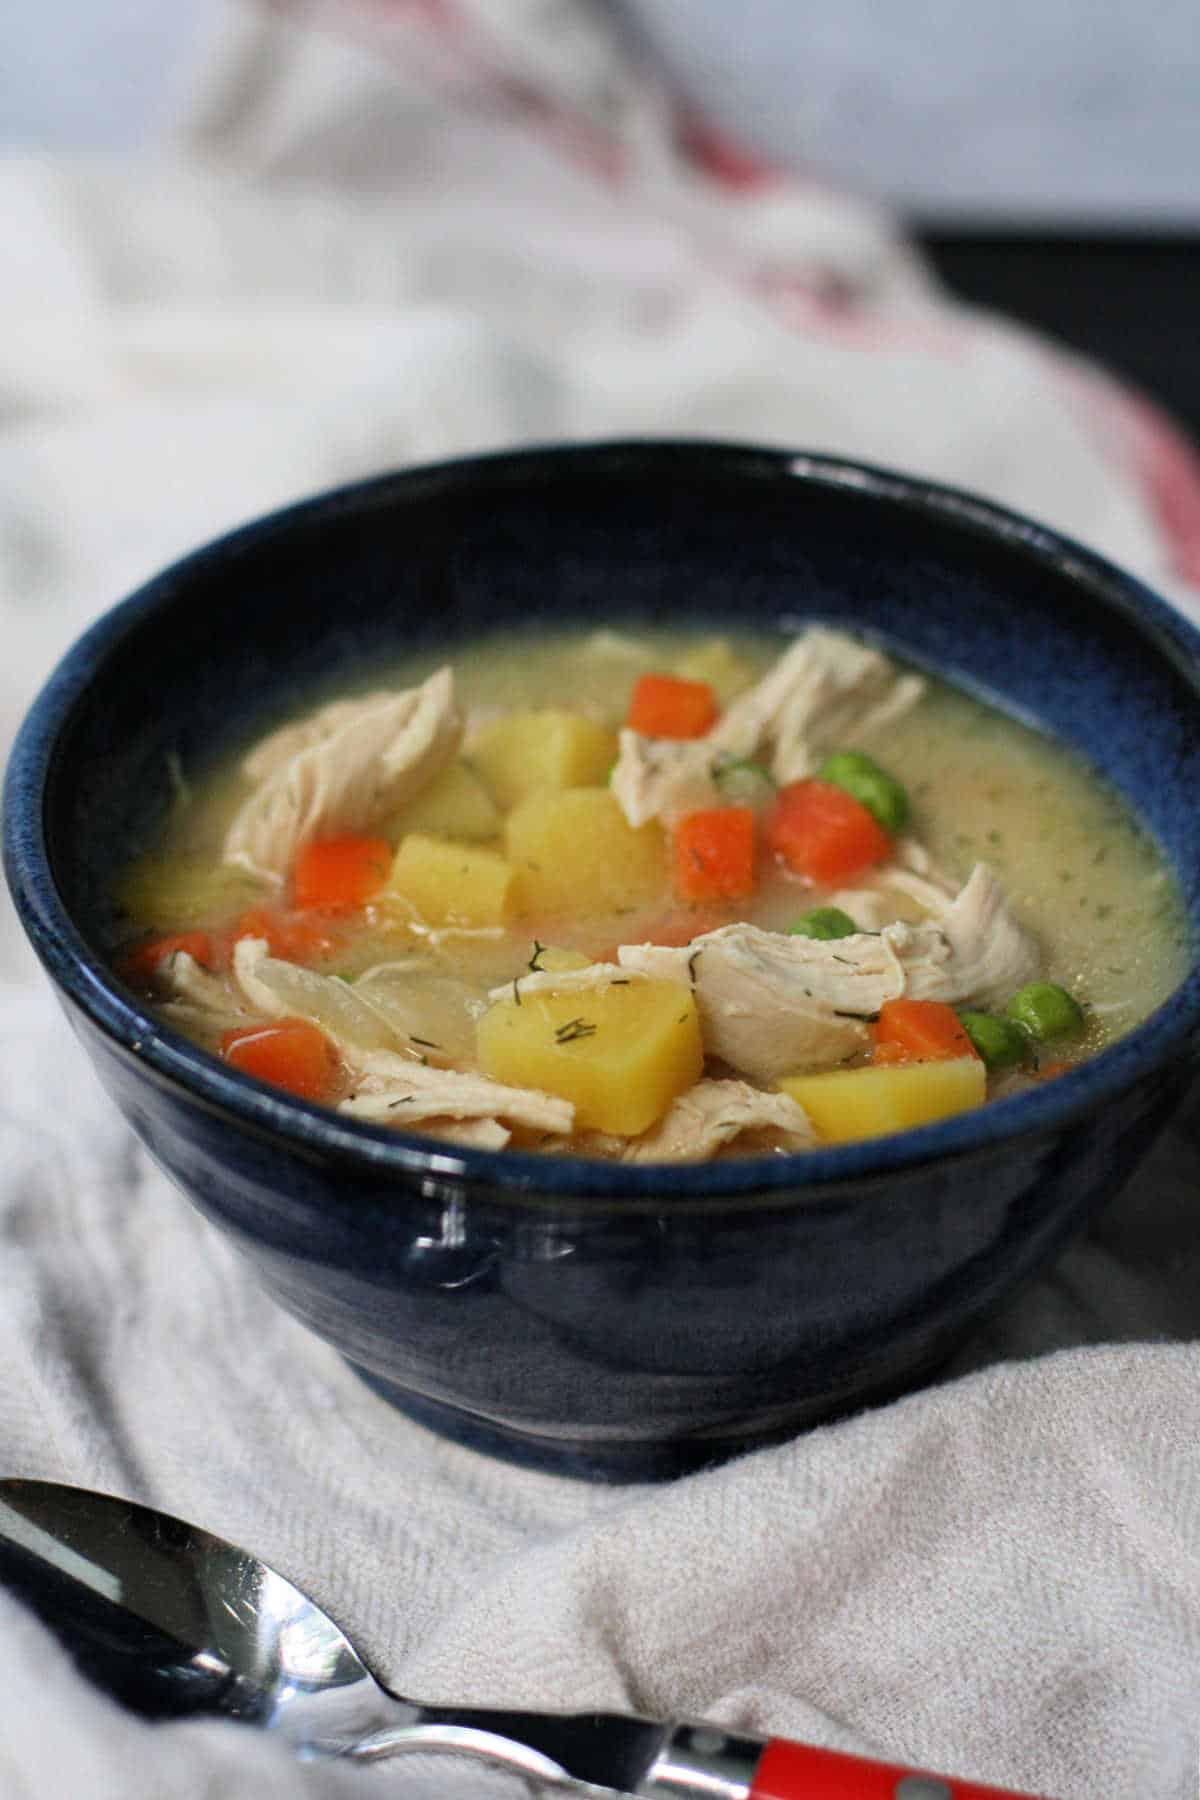 chicken soup with potatoes and carrots in a blue bowl